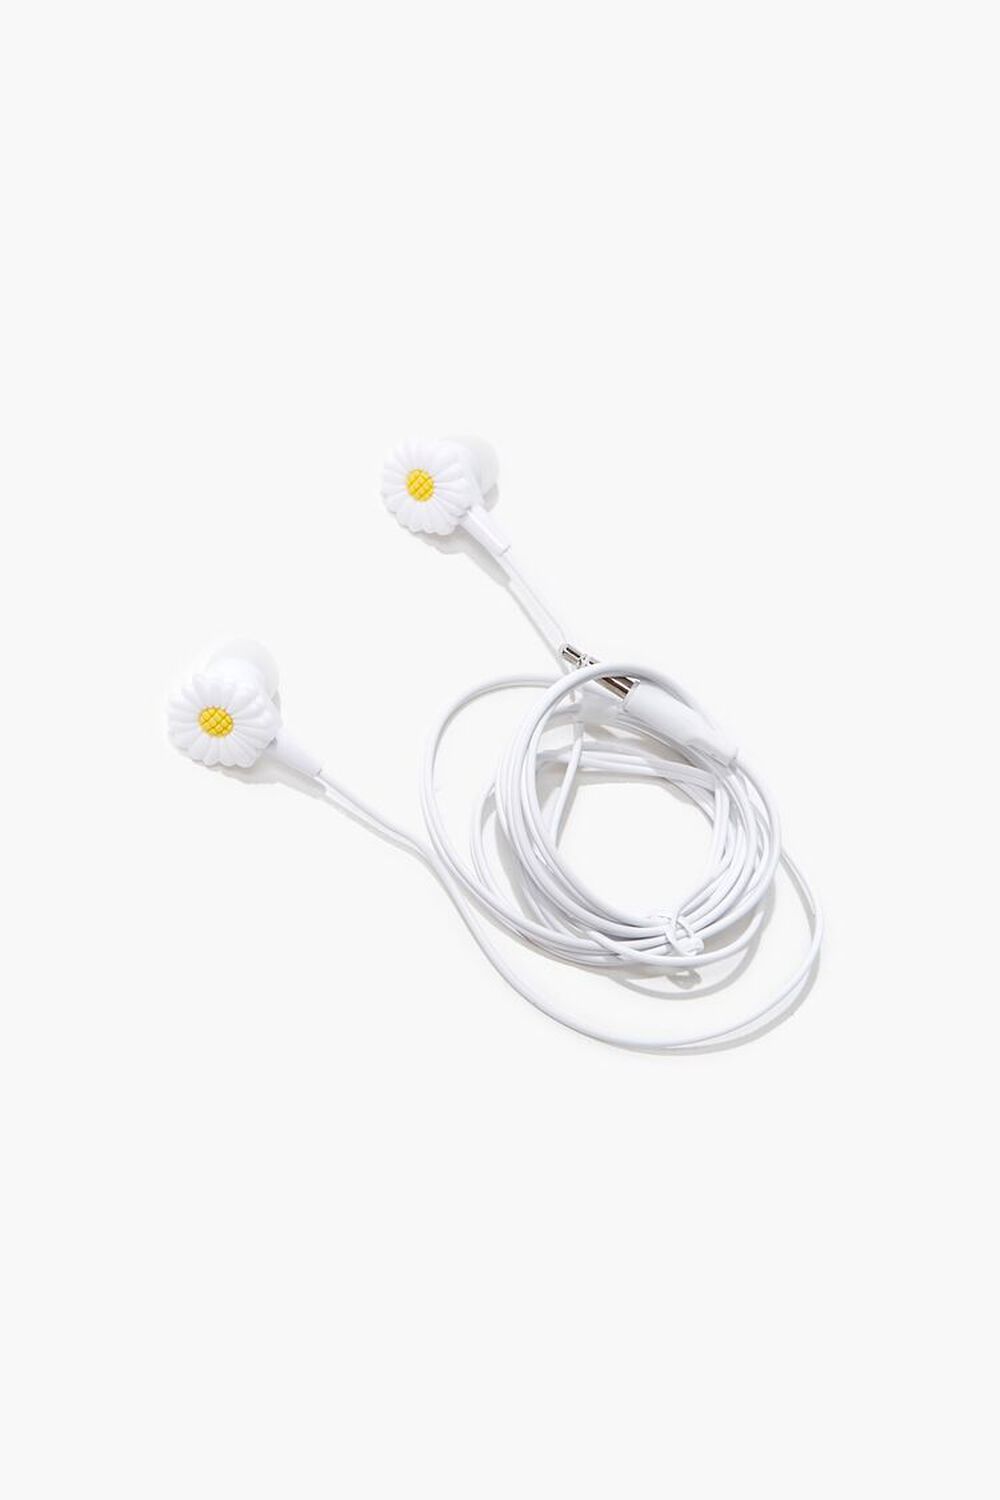 WHITE/MULTI Daisy Wired Earbuds, image 1